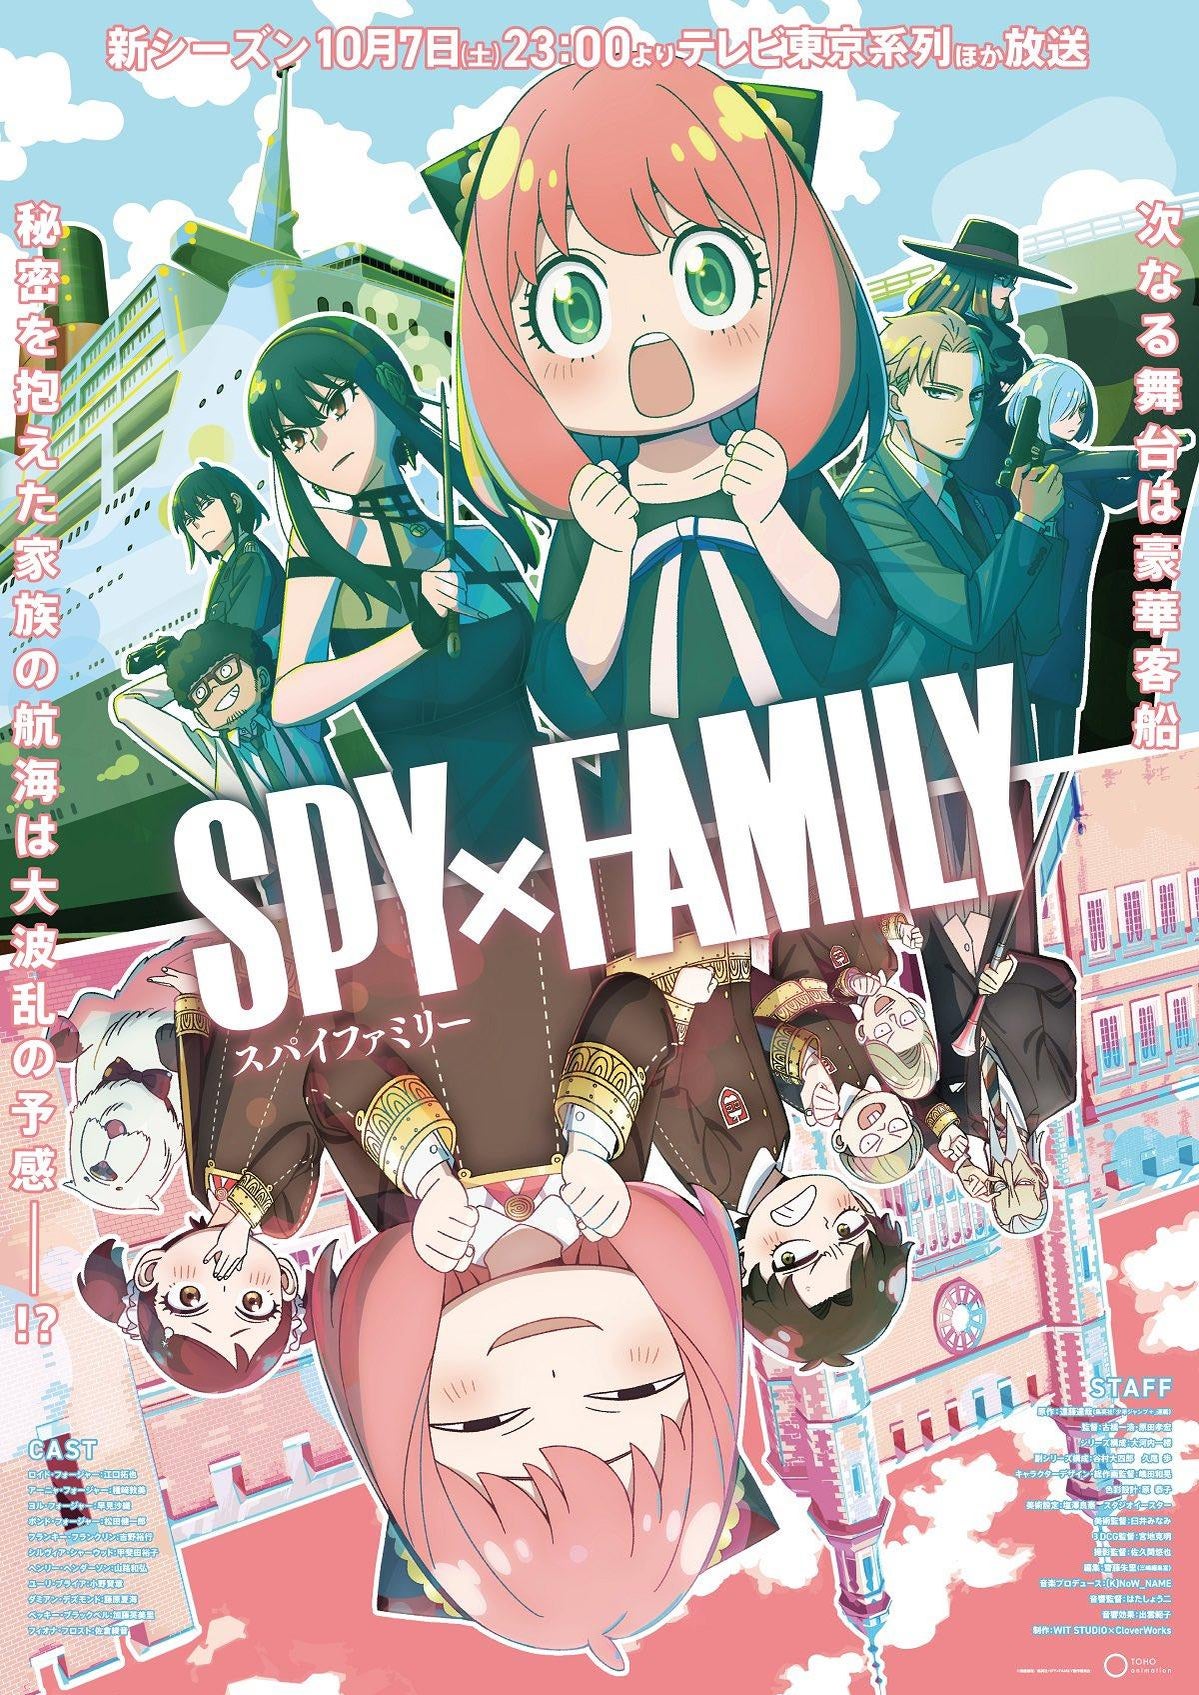 Spy x Family: What to Expect From Season 2 (According to the Manga)